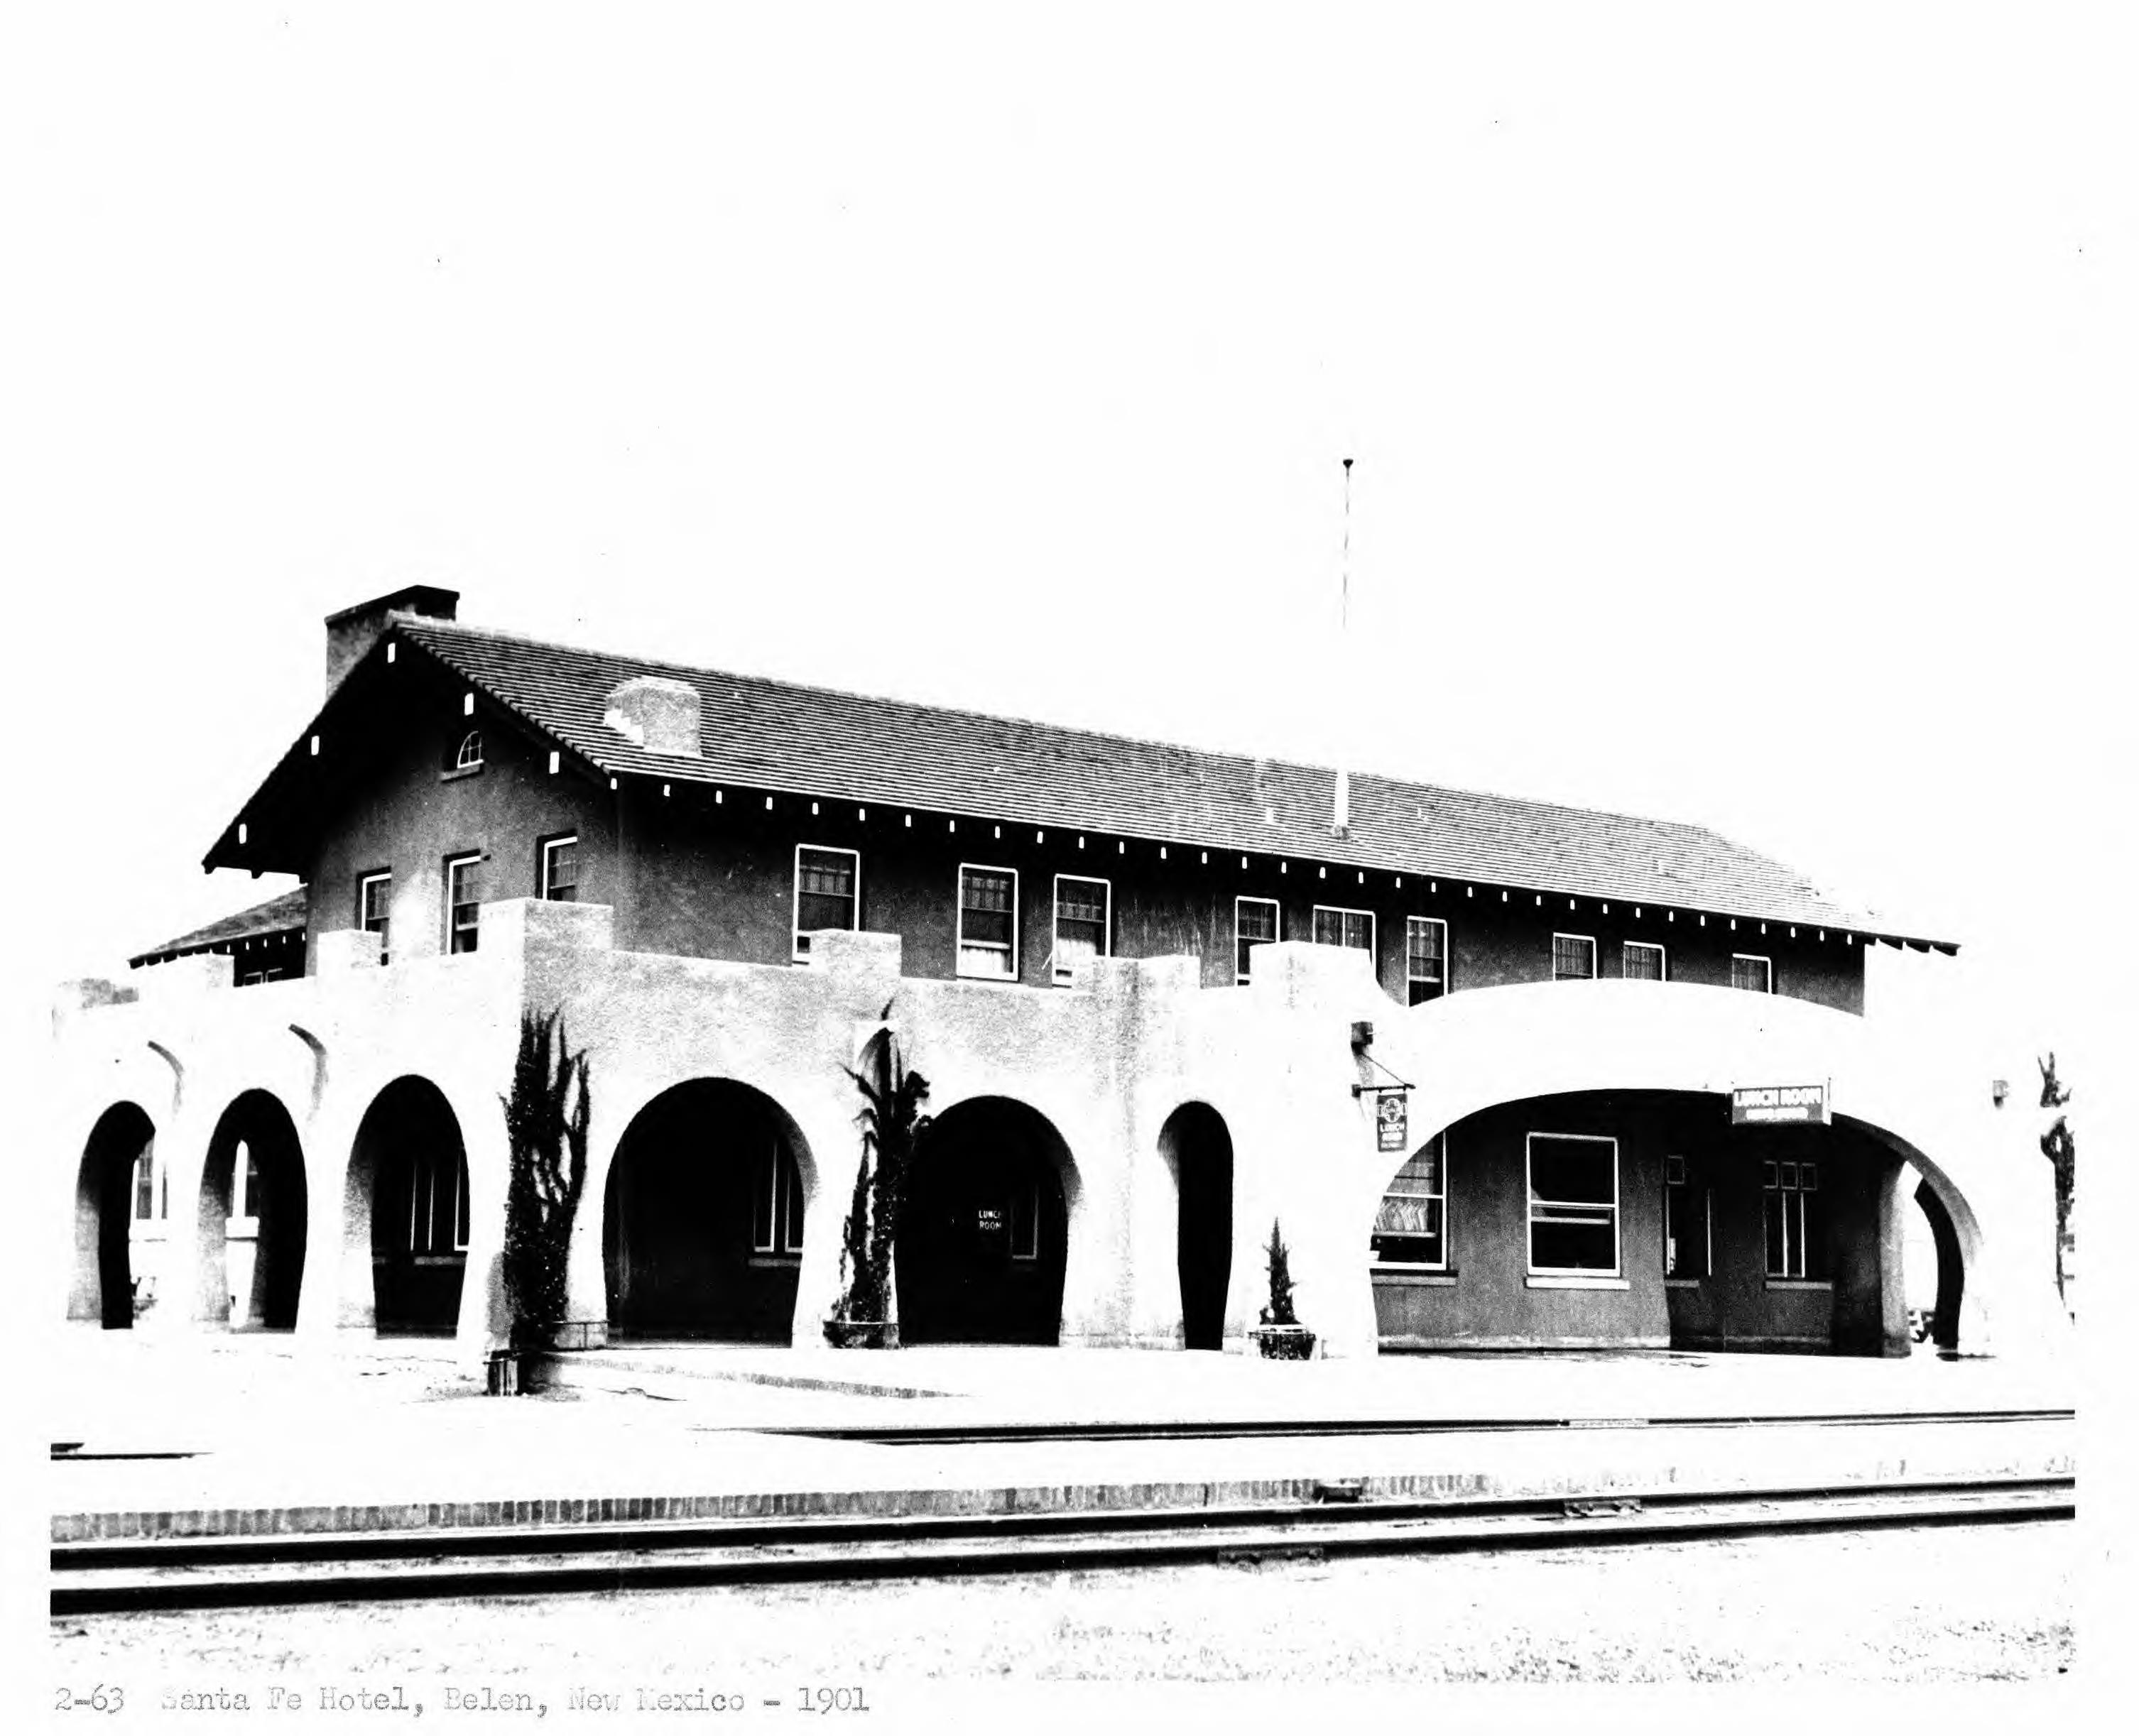 Harvey House, Belen (From BNSF photo archives).